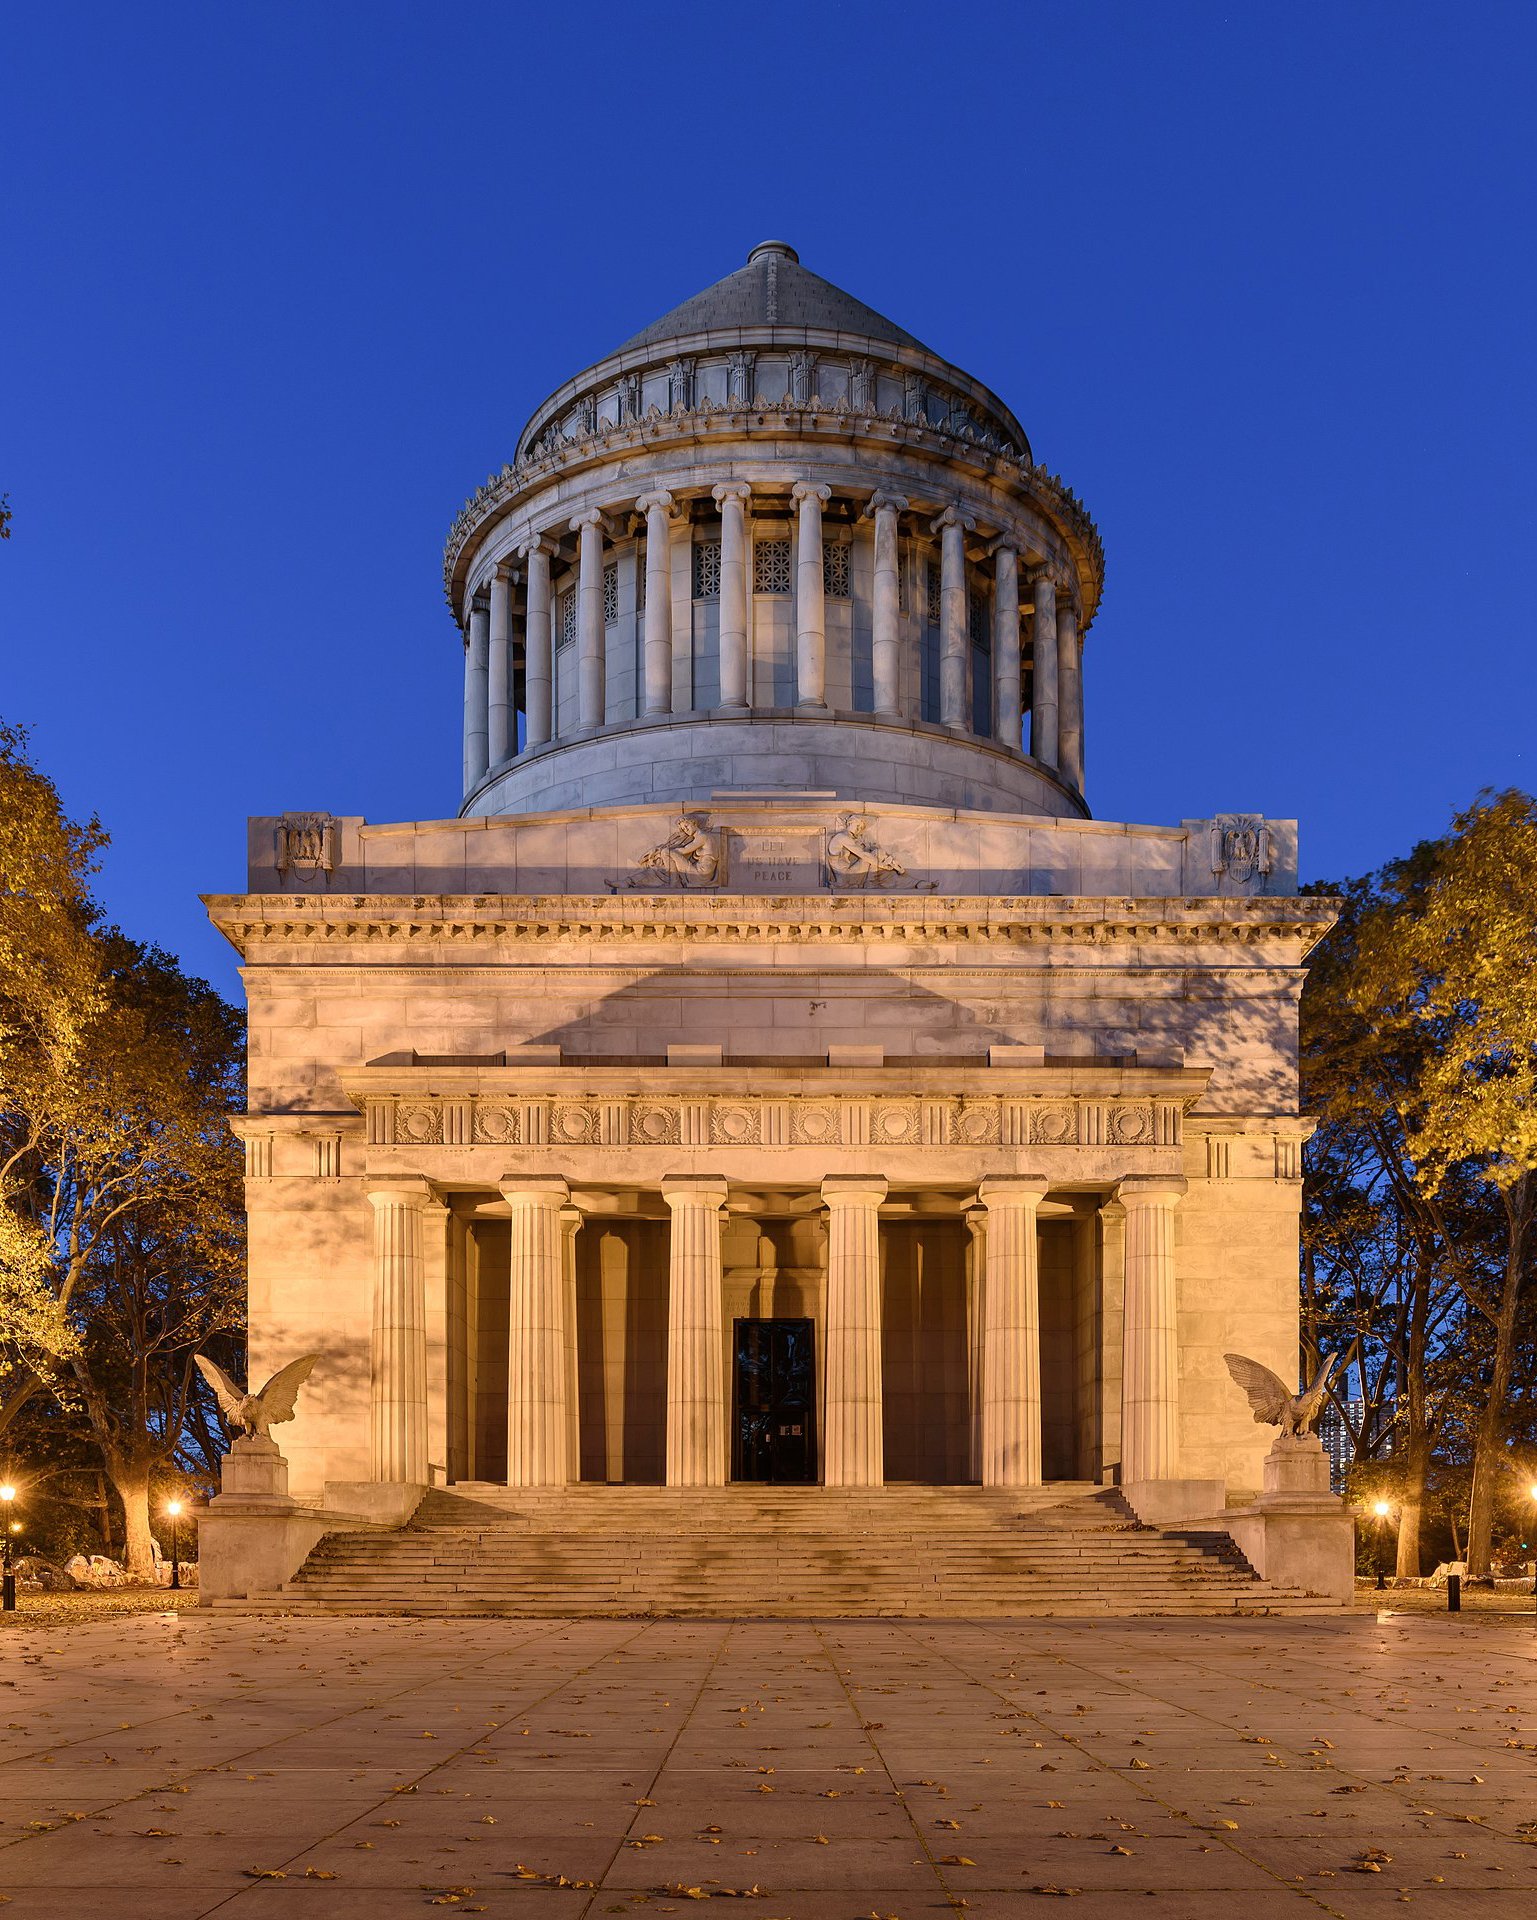 The General Grant National Memorial in Manhattan, New York City, photographed at twilight. The Neoclassical domed mausoleum, also known as Grant's Tomb, is illuminated against the evening sky, with its large granite steps leading up to a portico supported by Ionic columns. Sculptural details and trees in autumn foliage frame the tranquil scene.